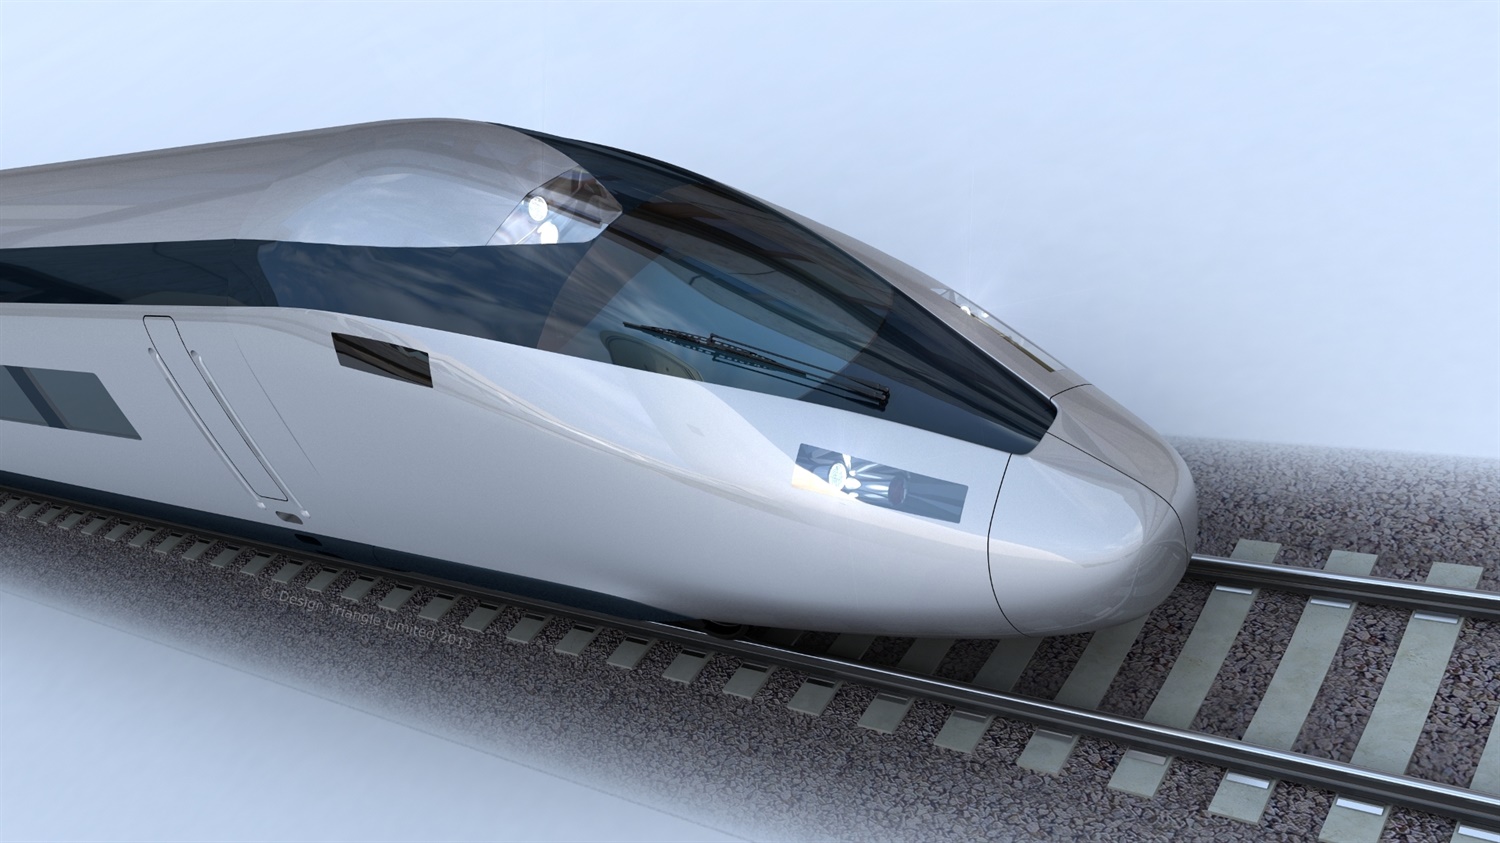 Euston Express HS2 alternative would save £3.7bn, Lords told